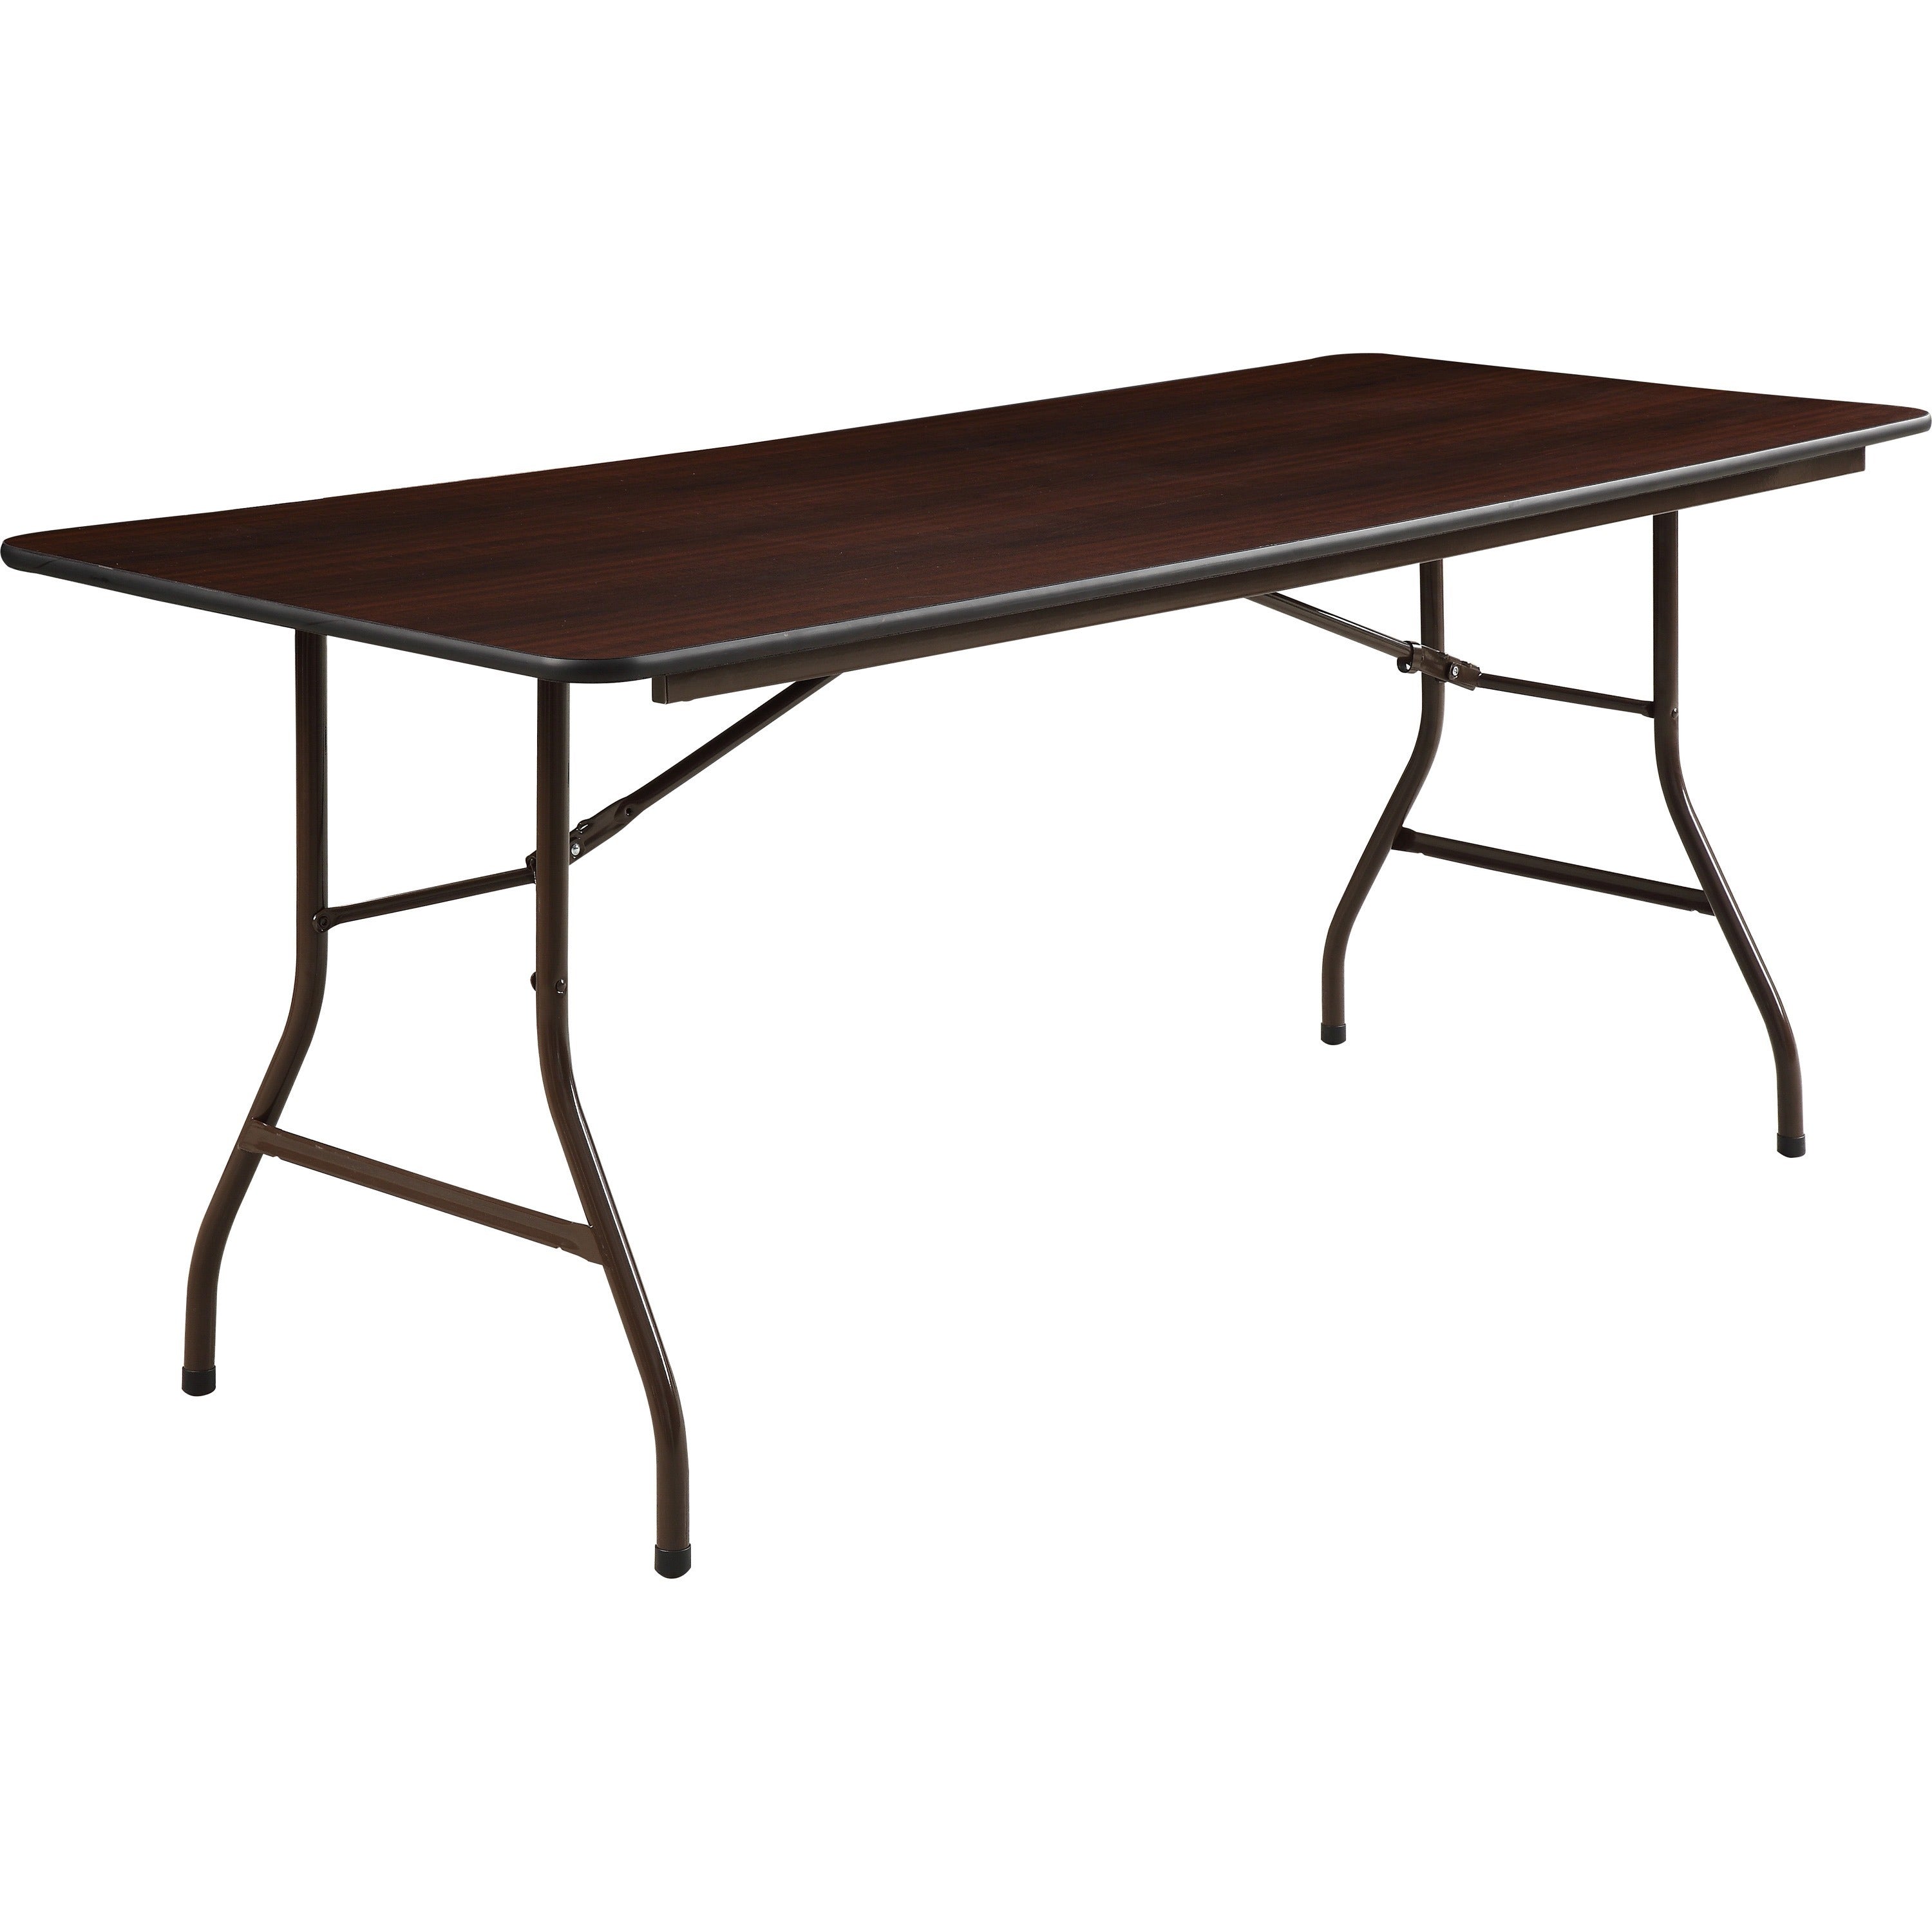 Lorell Economy Folding Table - For - Table TopMelamine Rectangle Top - 500 lb Capacity - 72" Table Top Length x 30" Table Top Width x 0.63" Table Top Thickness - 29" Height - Mahogany - 1 Each - 